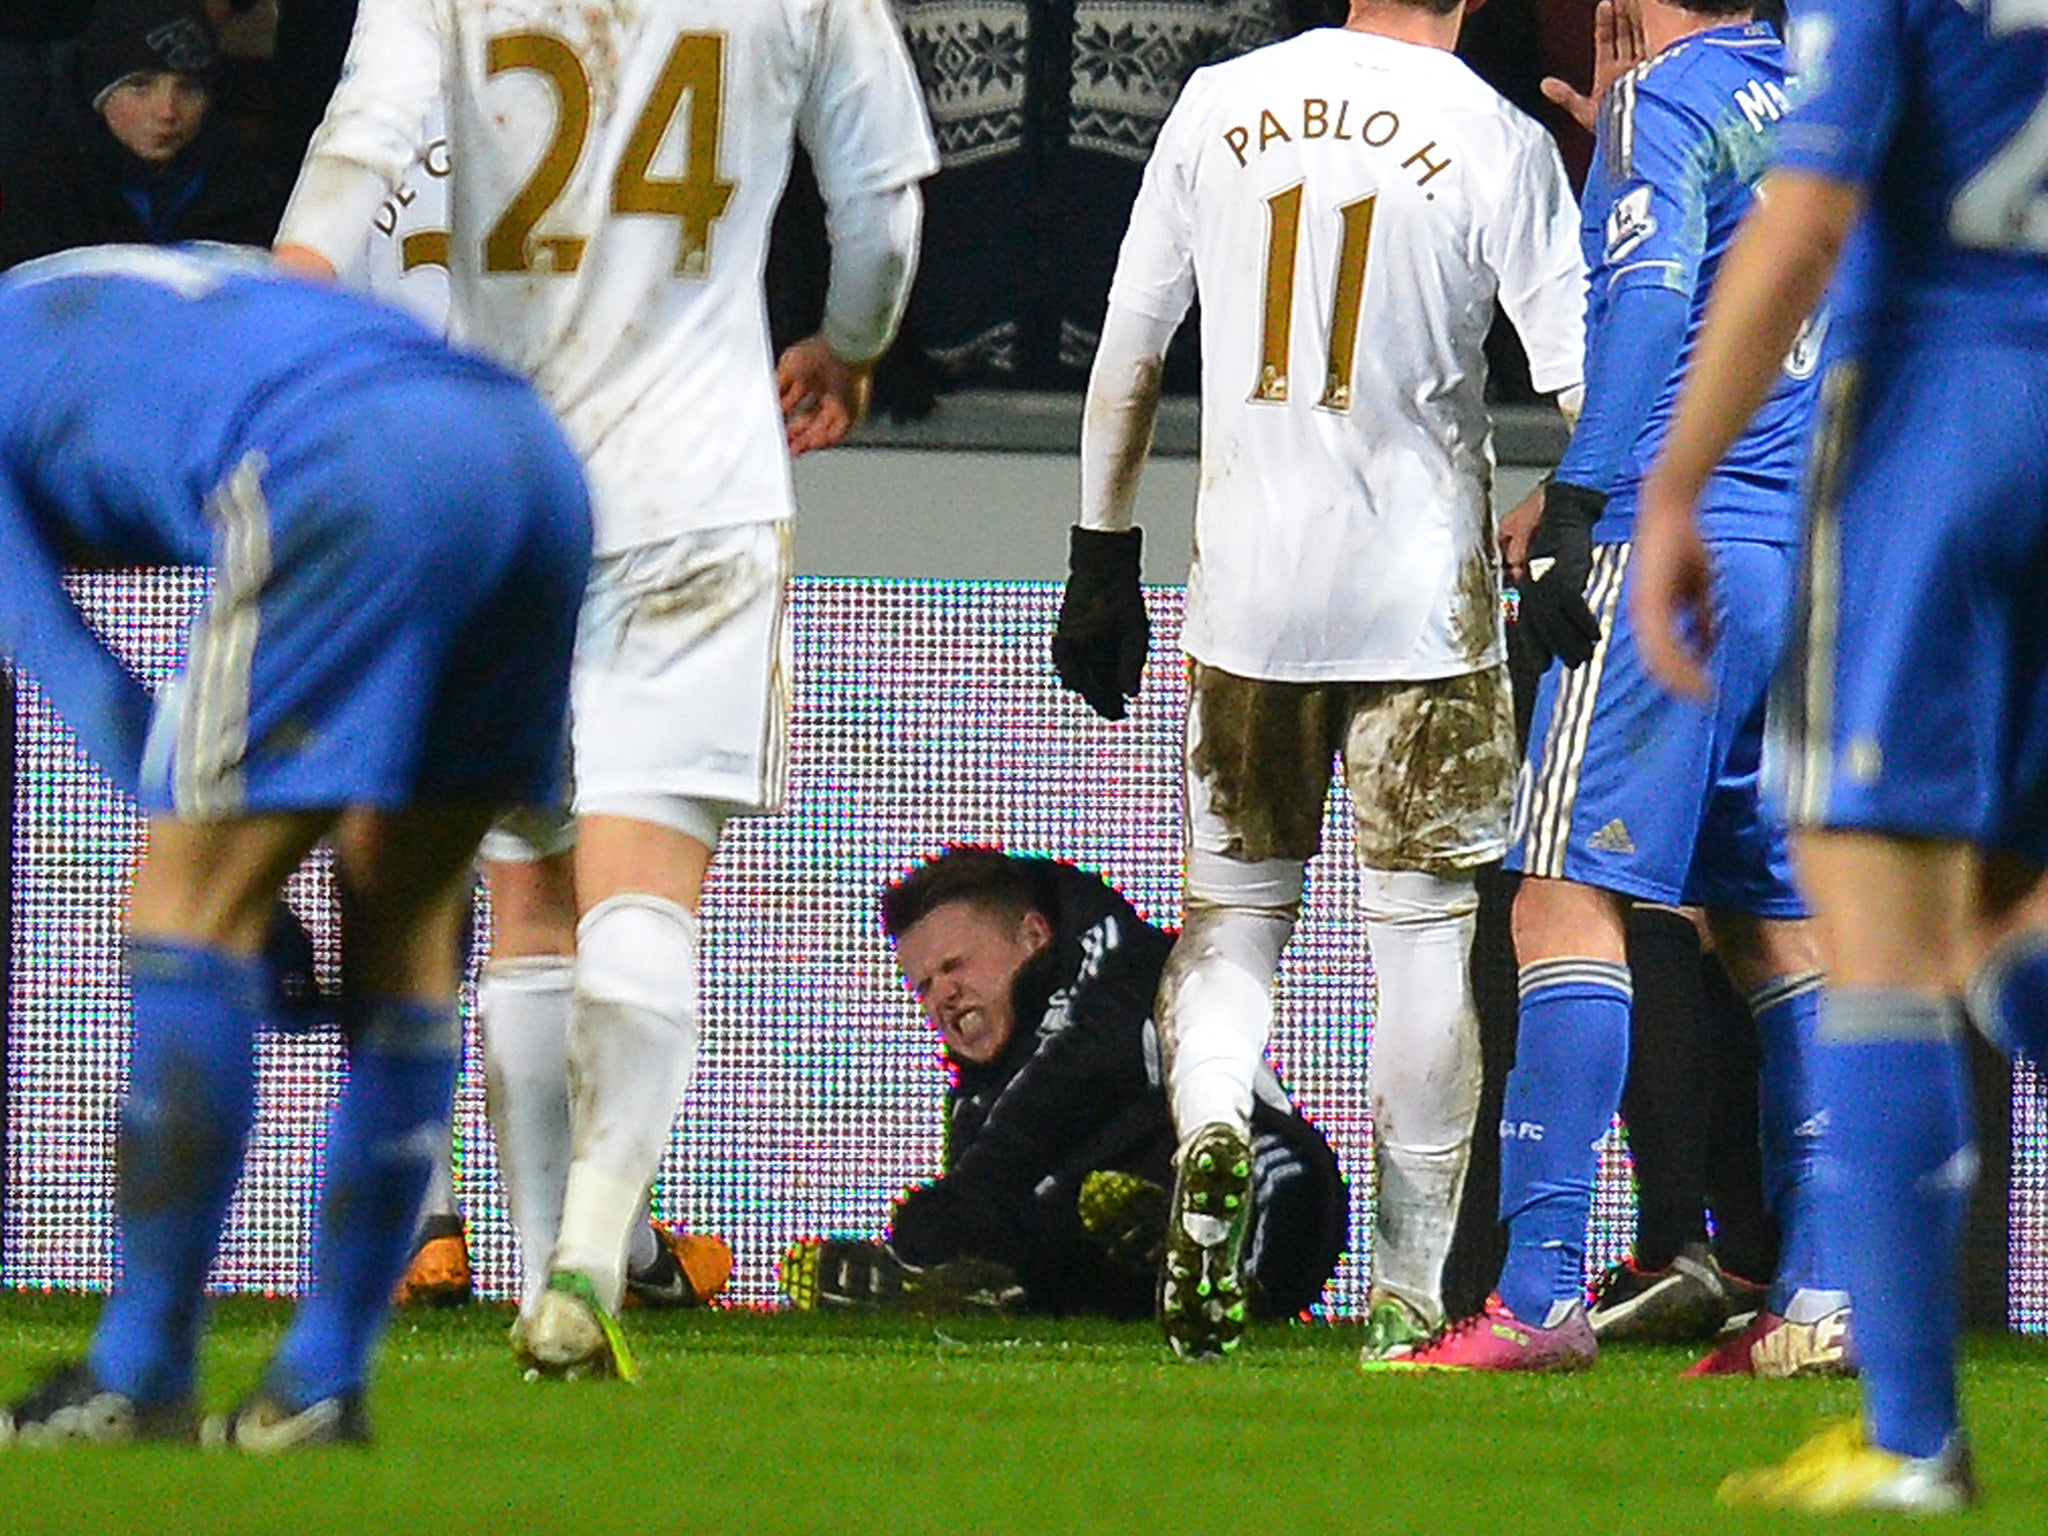 The ball boy in pain after getting kicked by Eden Hazard